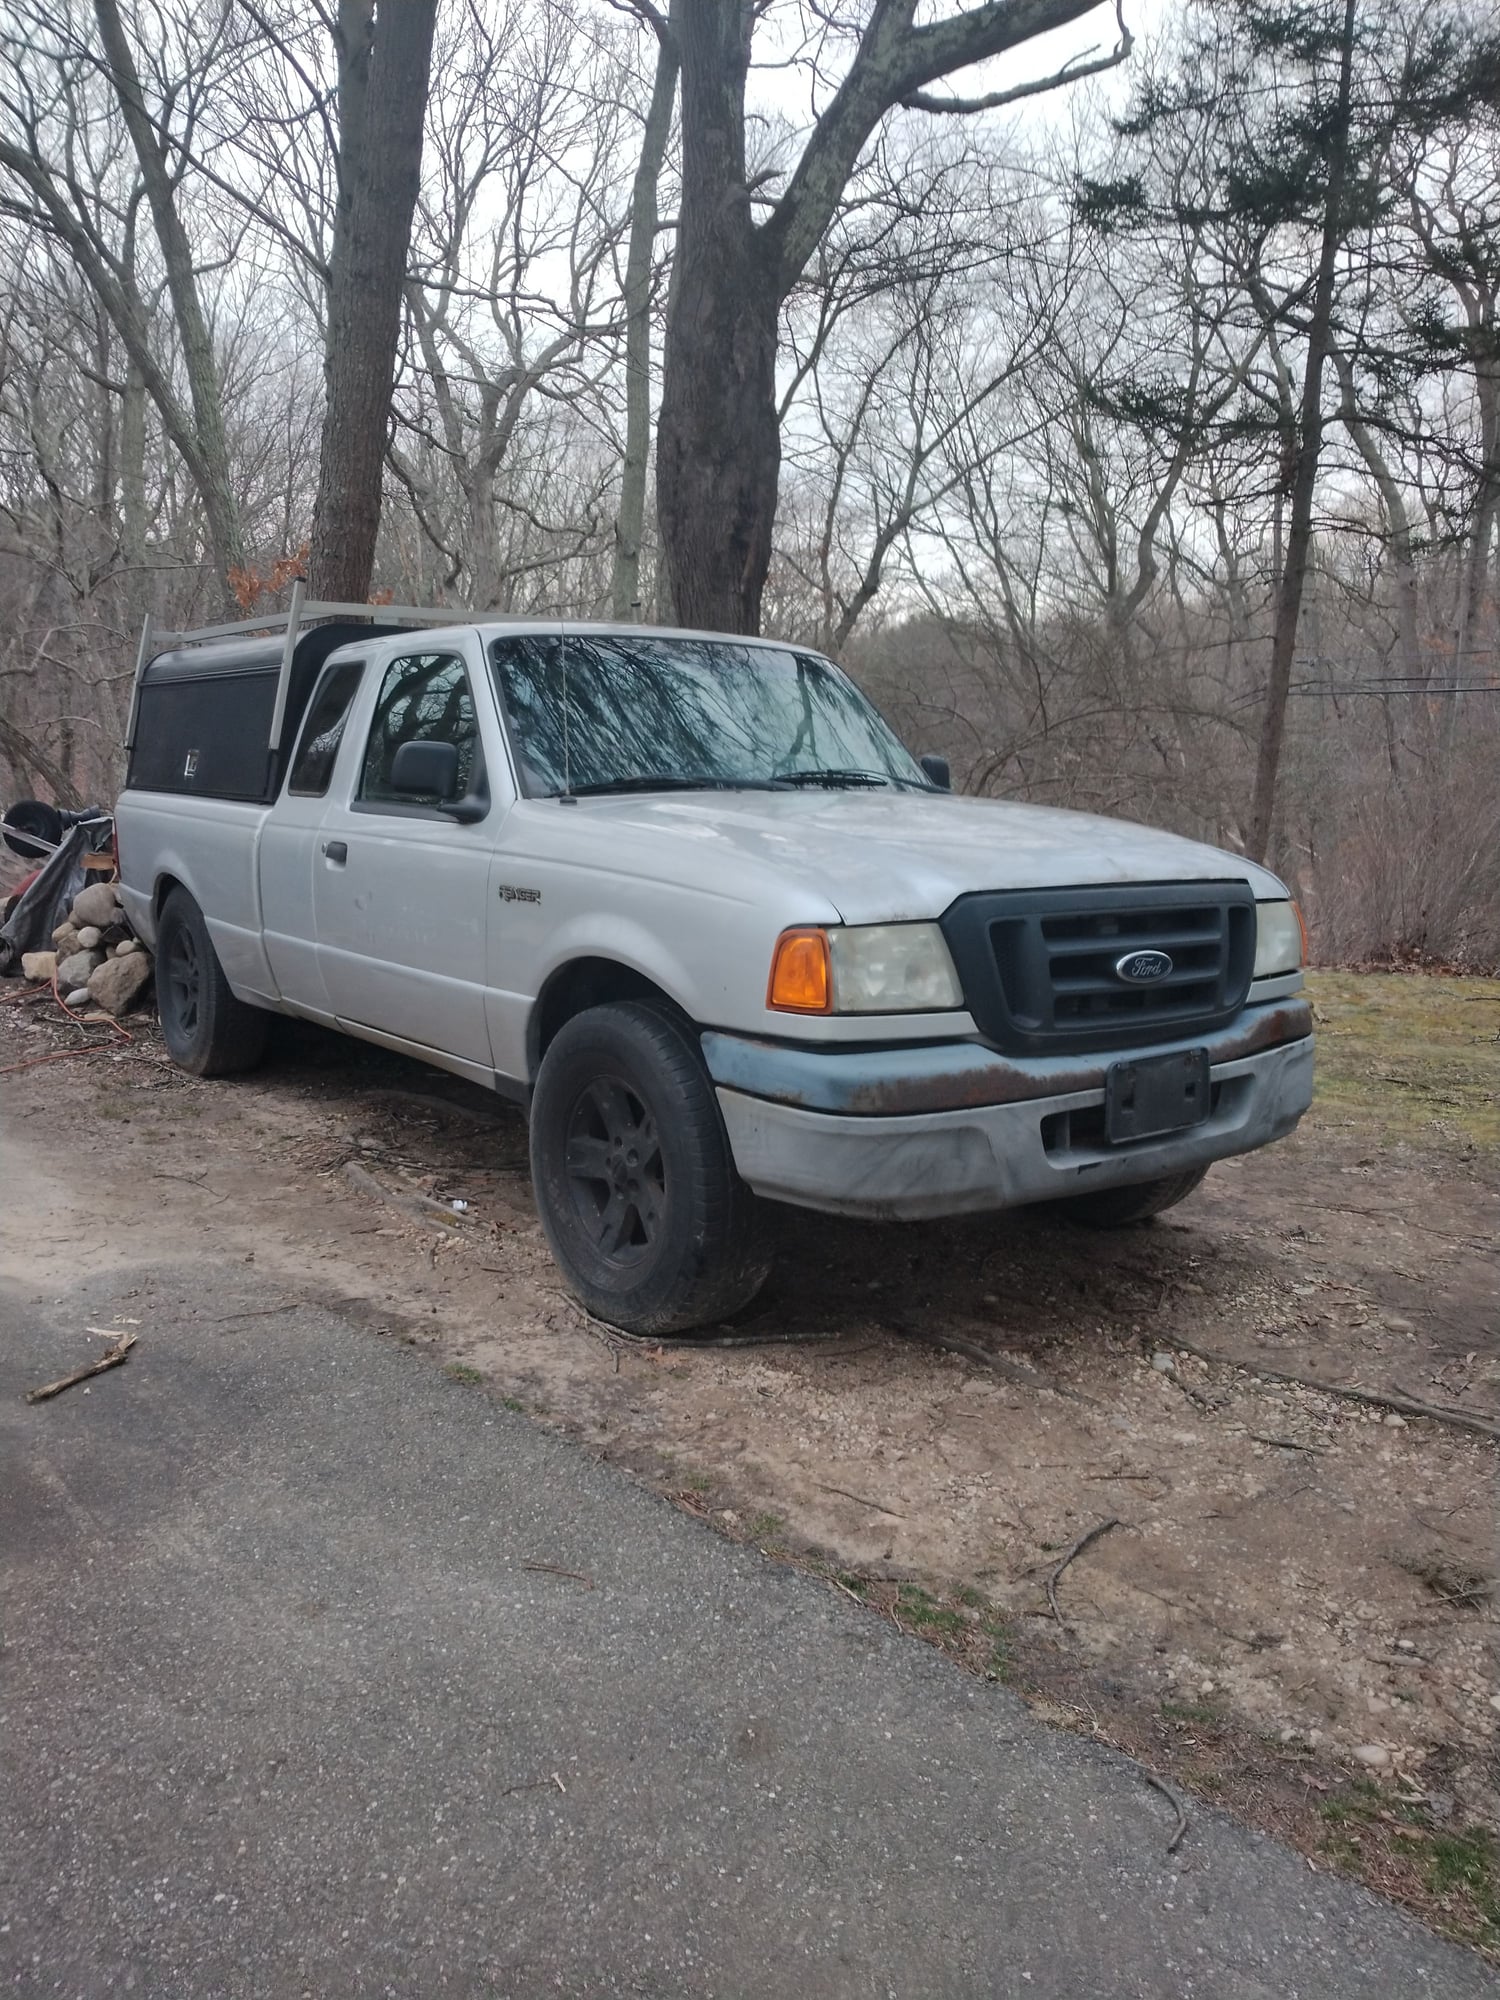 2004 Ford Ranger - Selling 2004 Supercab - Used - VIN 1FTYR14U84PB09539 - 217,000 Miles - Automatic - Truck - Syosset, NY 11791, United States